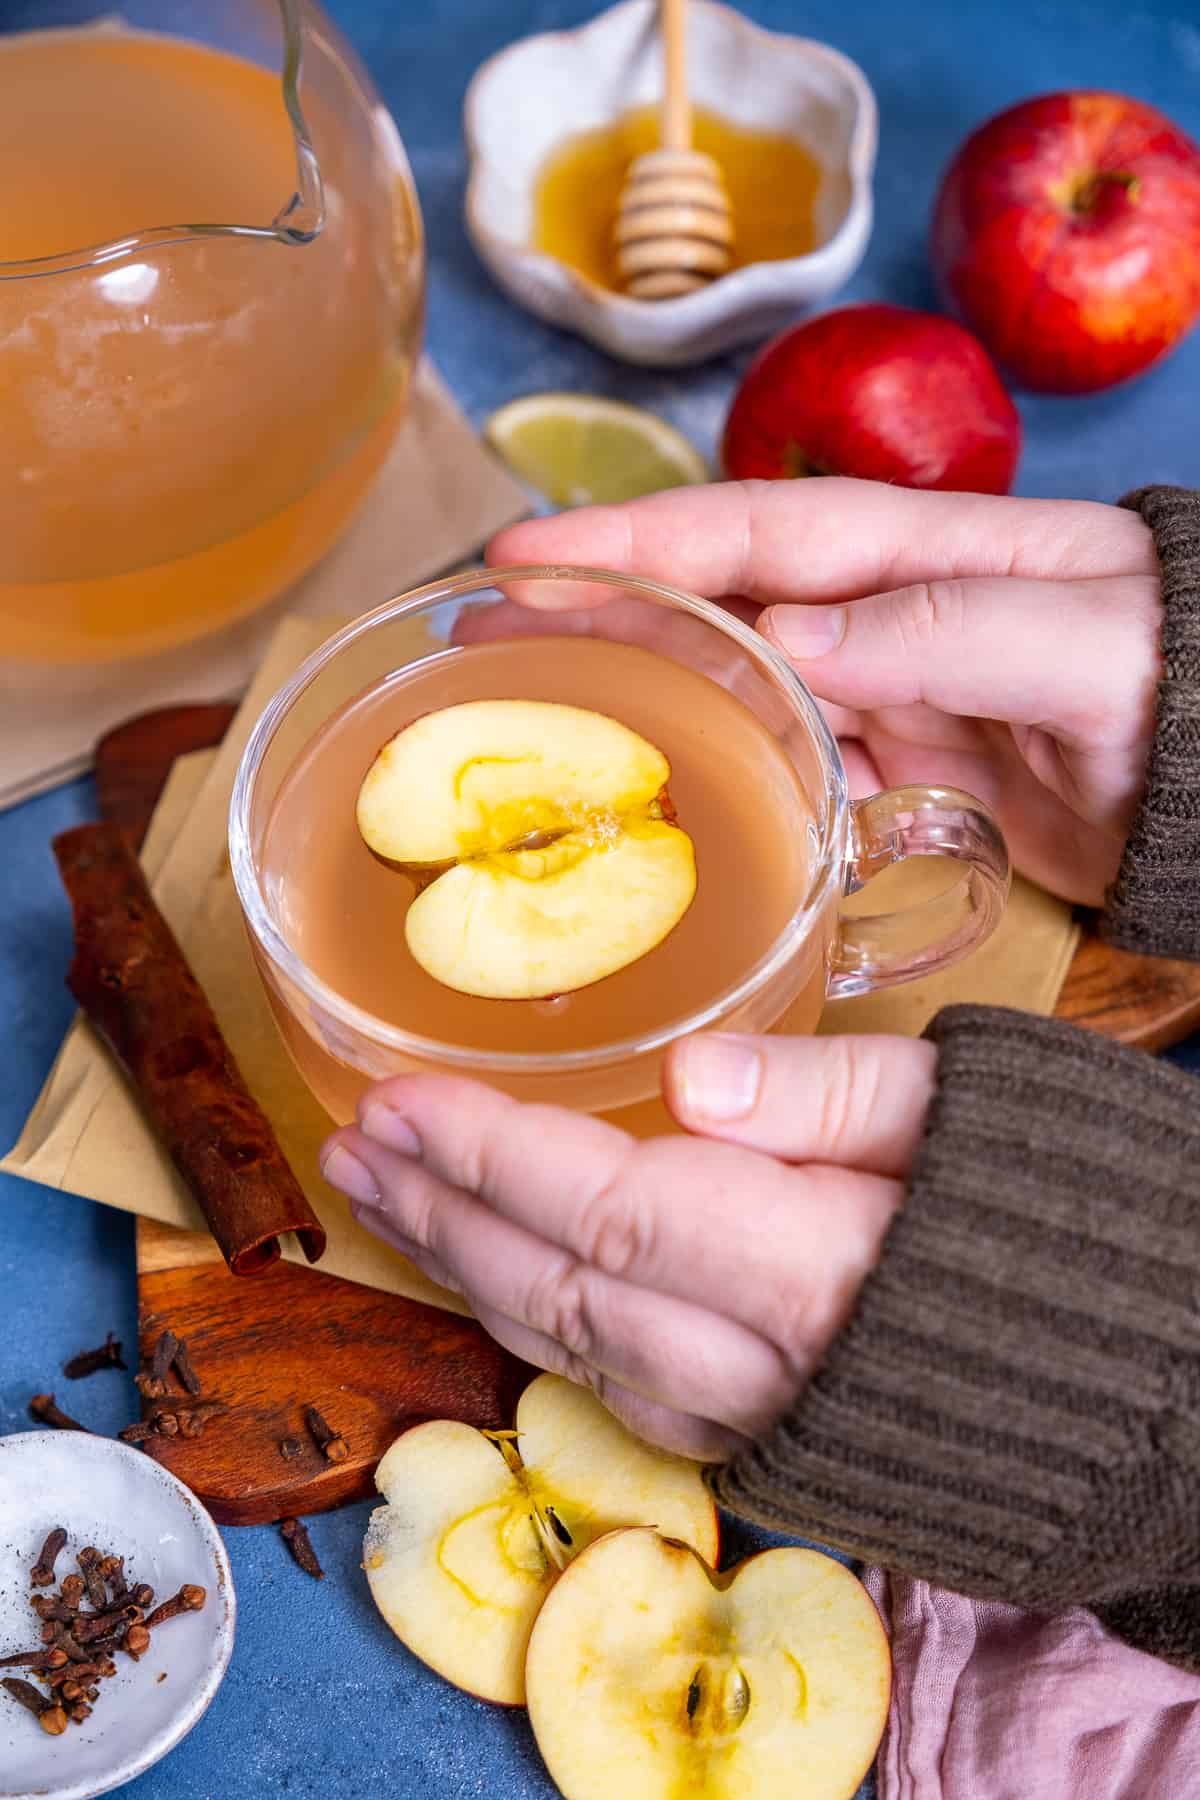 Hands holding a cup of warm apple tea, apples and honey on the side.